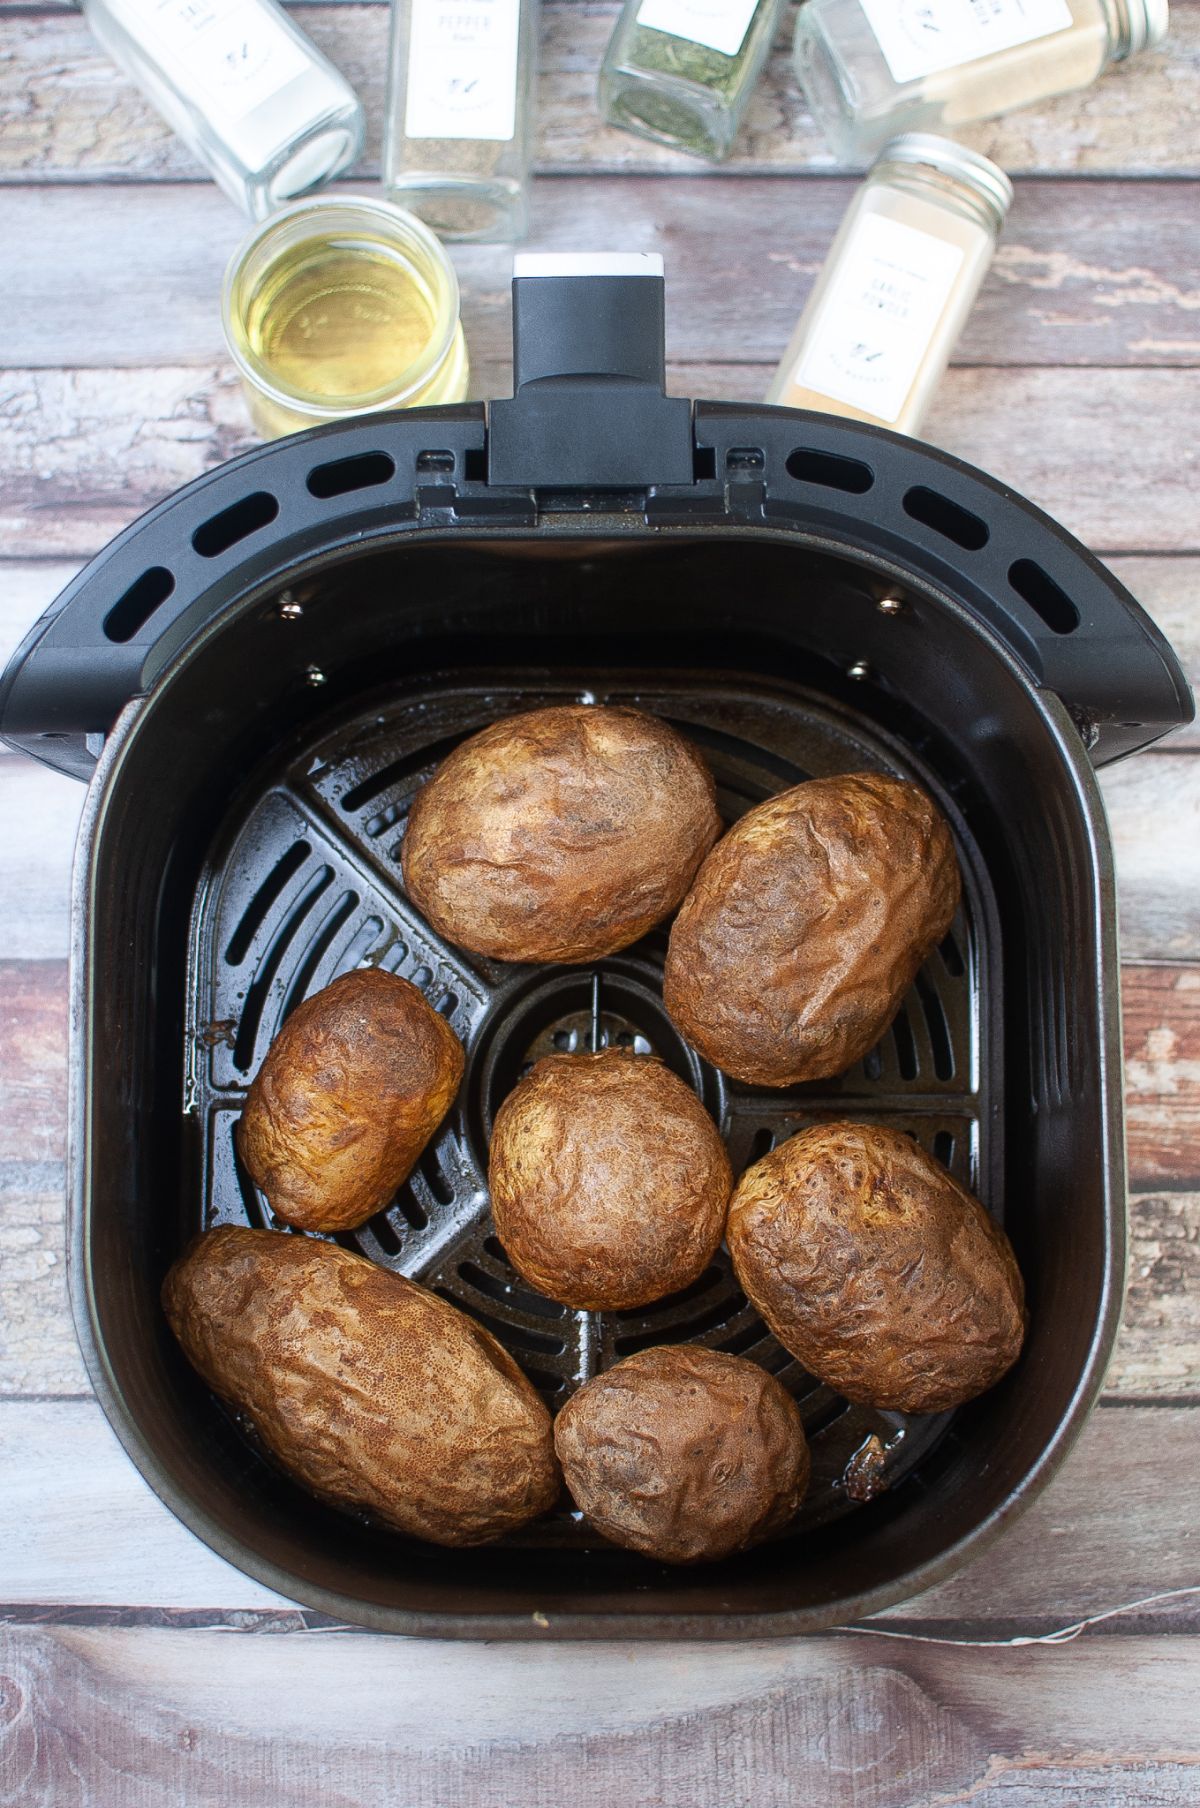 cooked potatoes in the air fryer next to oil in a glass and spices in glass containers